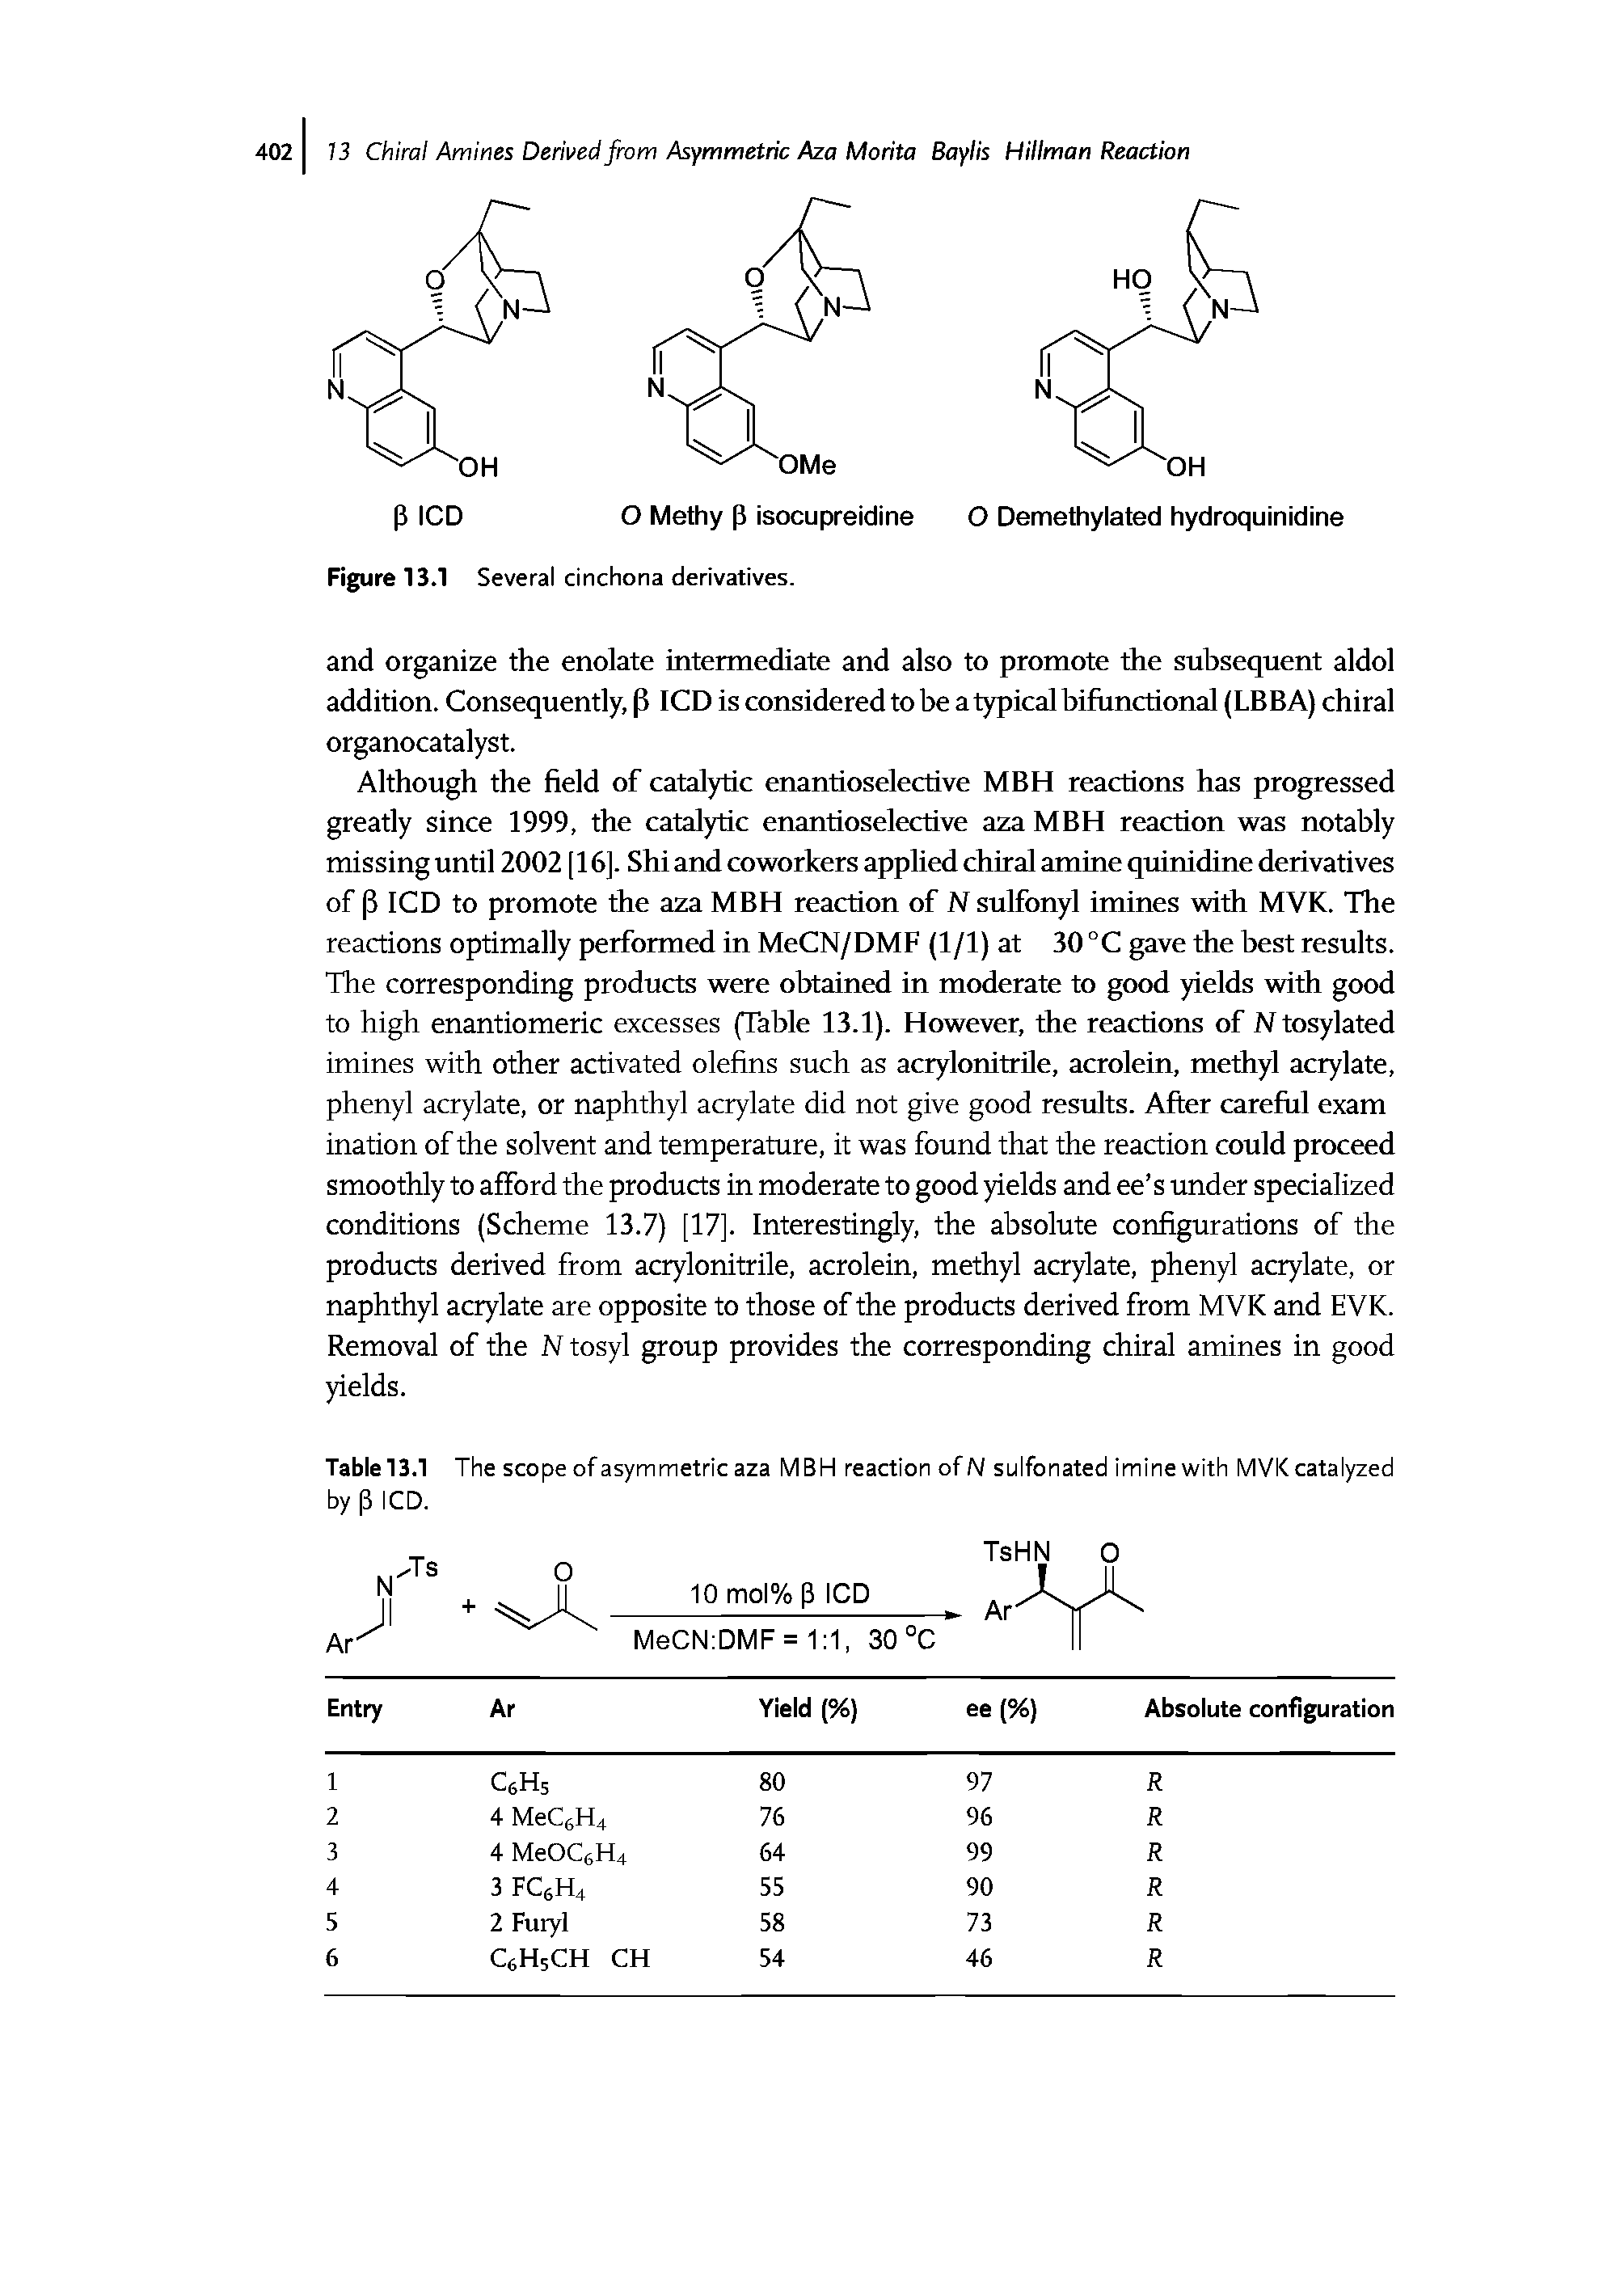 Tablel3.1 The scope of asymmetric aza MBH reaction of N sulfonated imine with MVK catalyzed by [3 ICD.